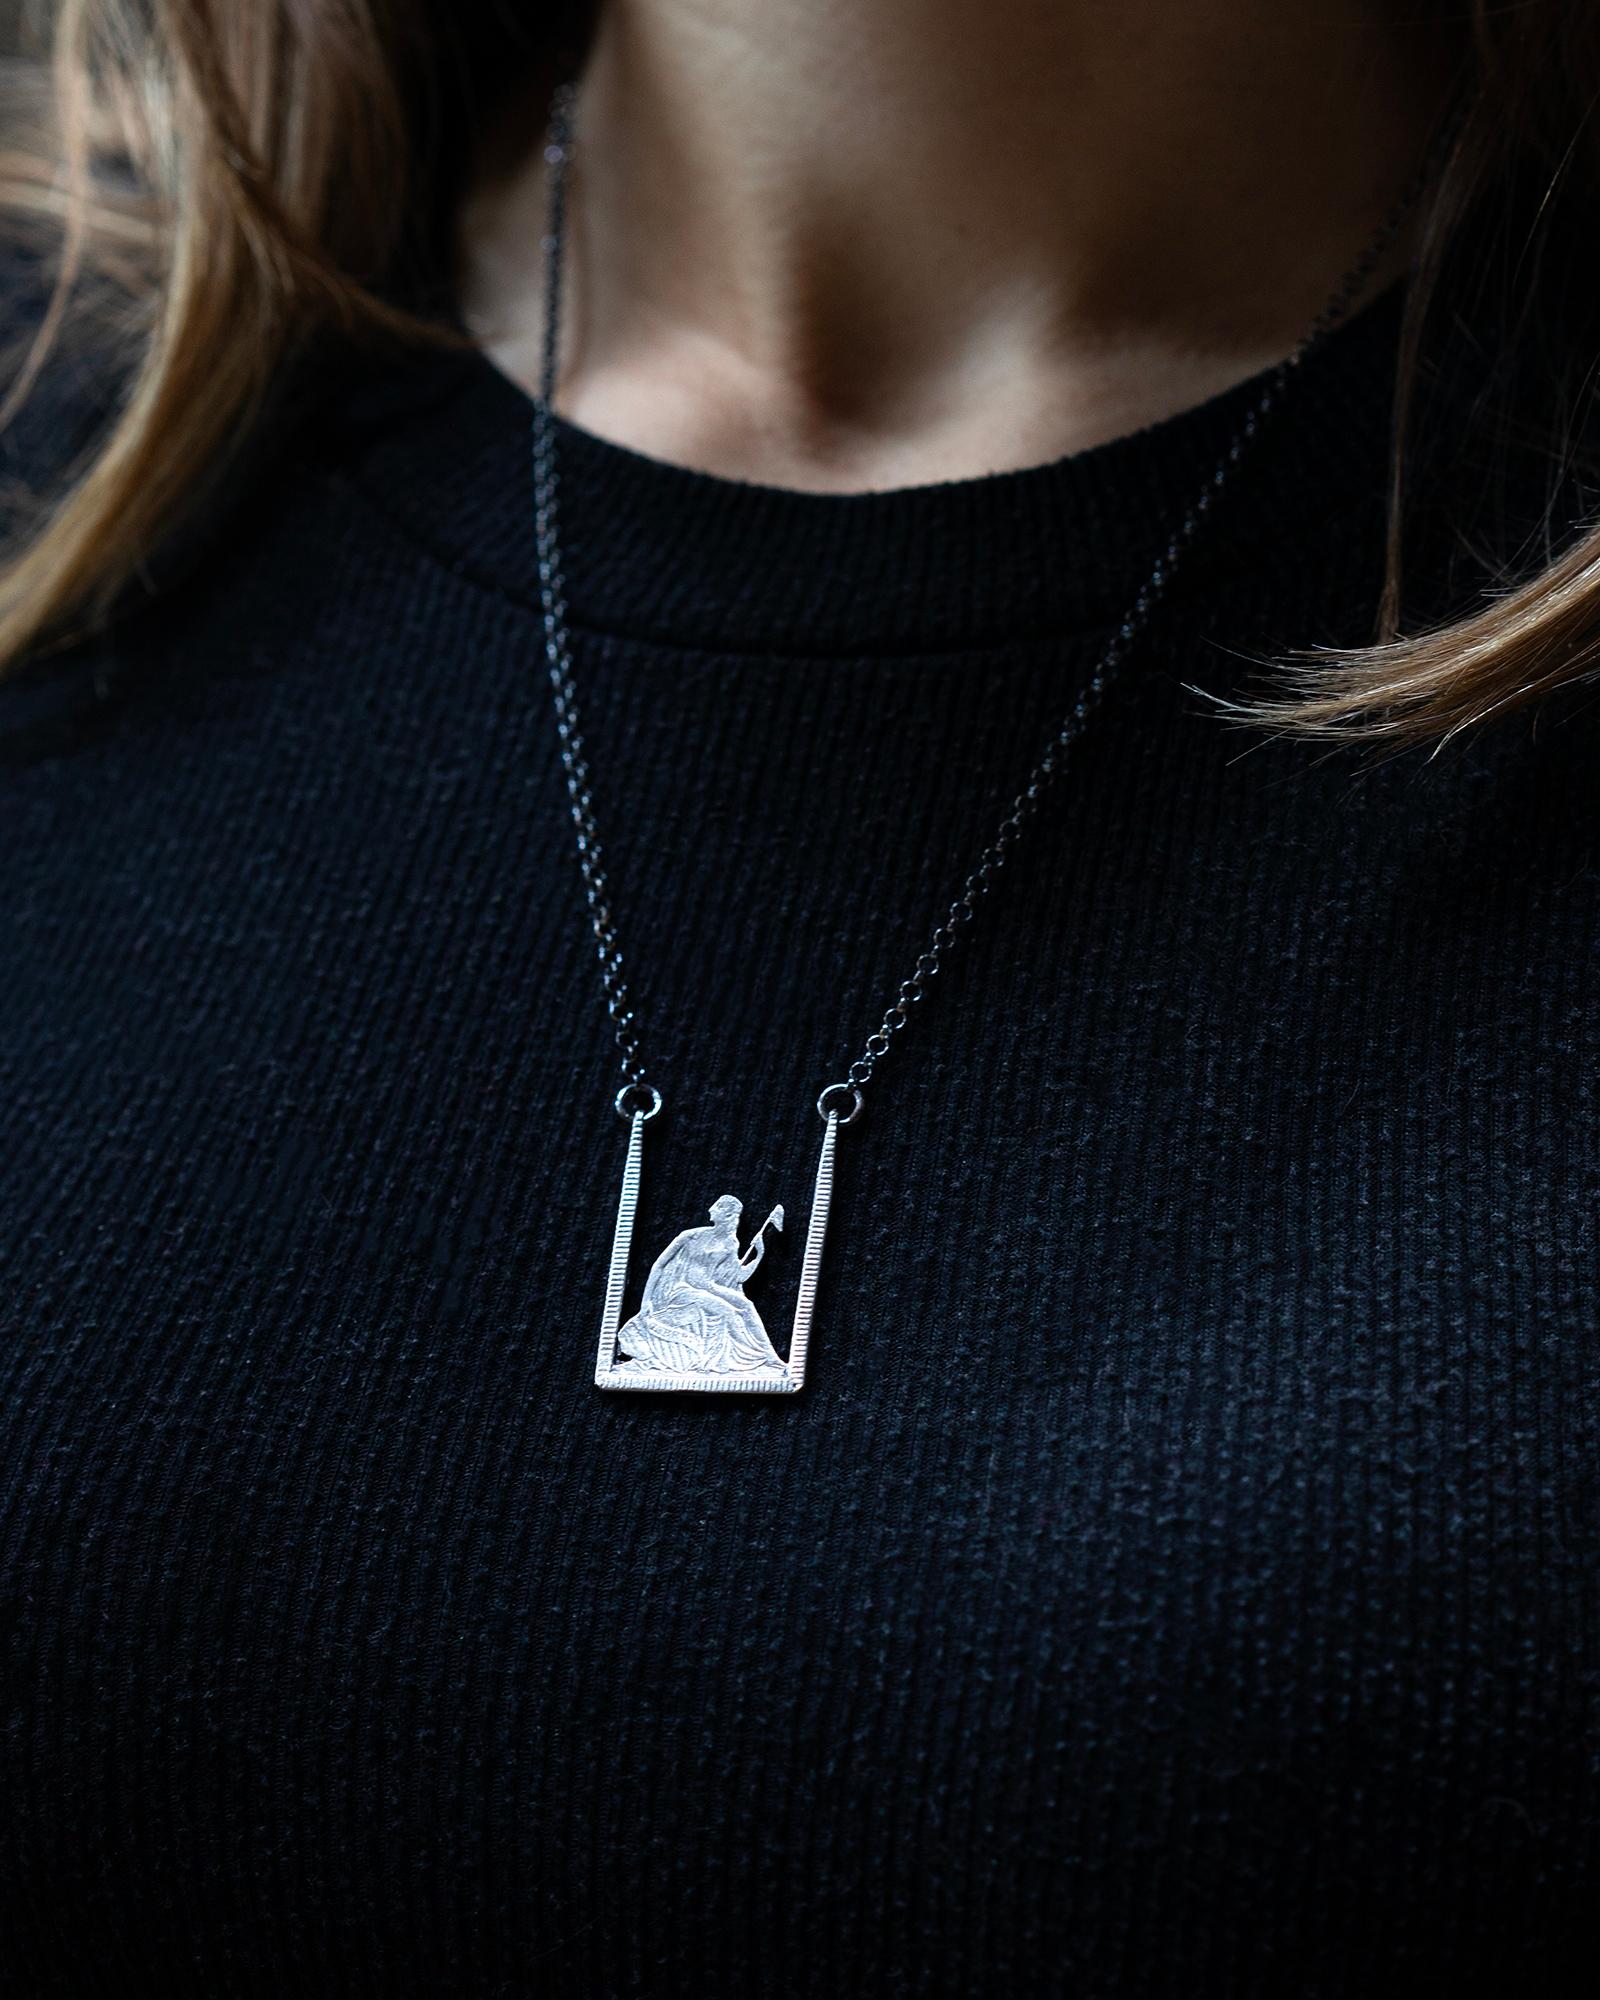 Sitting Liberty Necklace  - Contemporary Art by Stacey Lee Webber